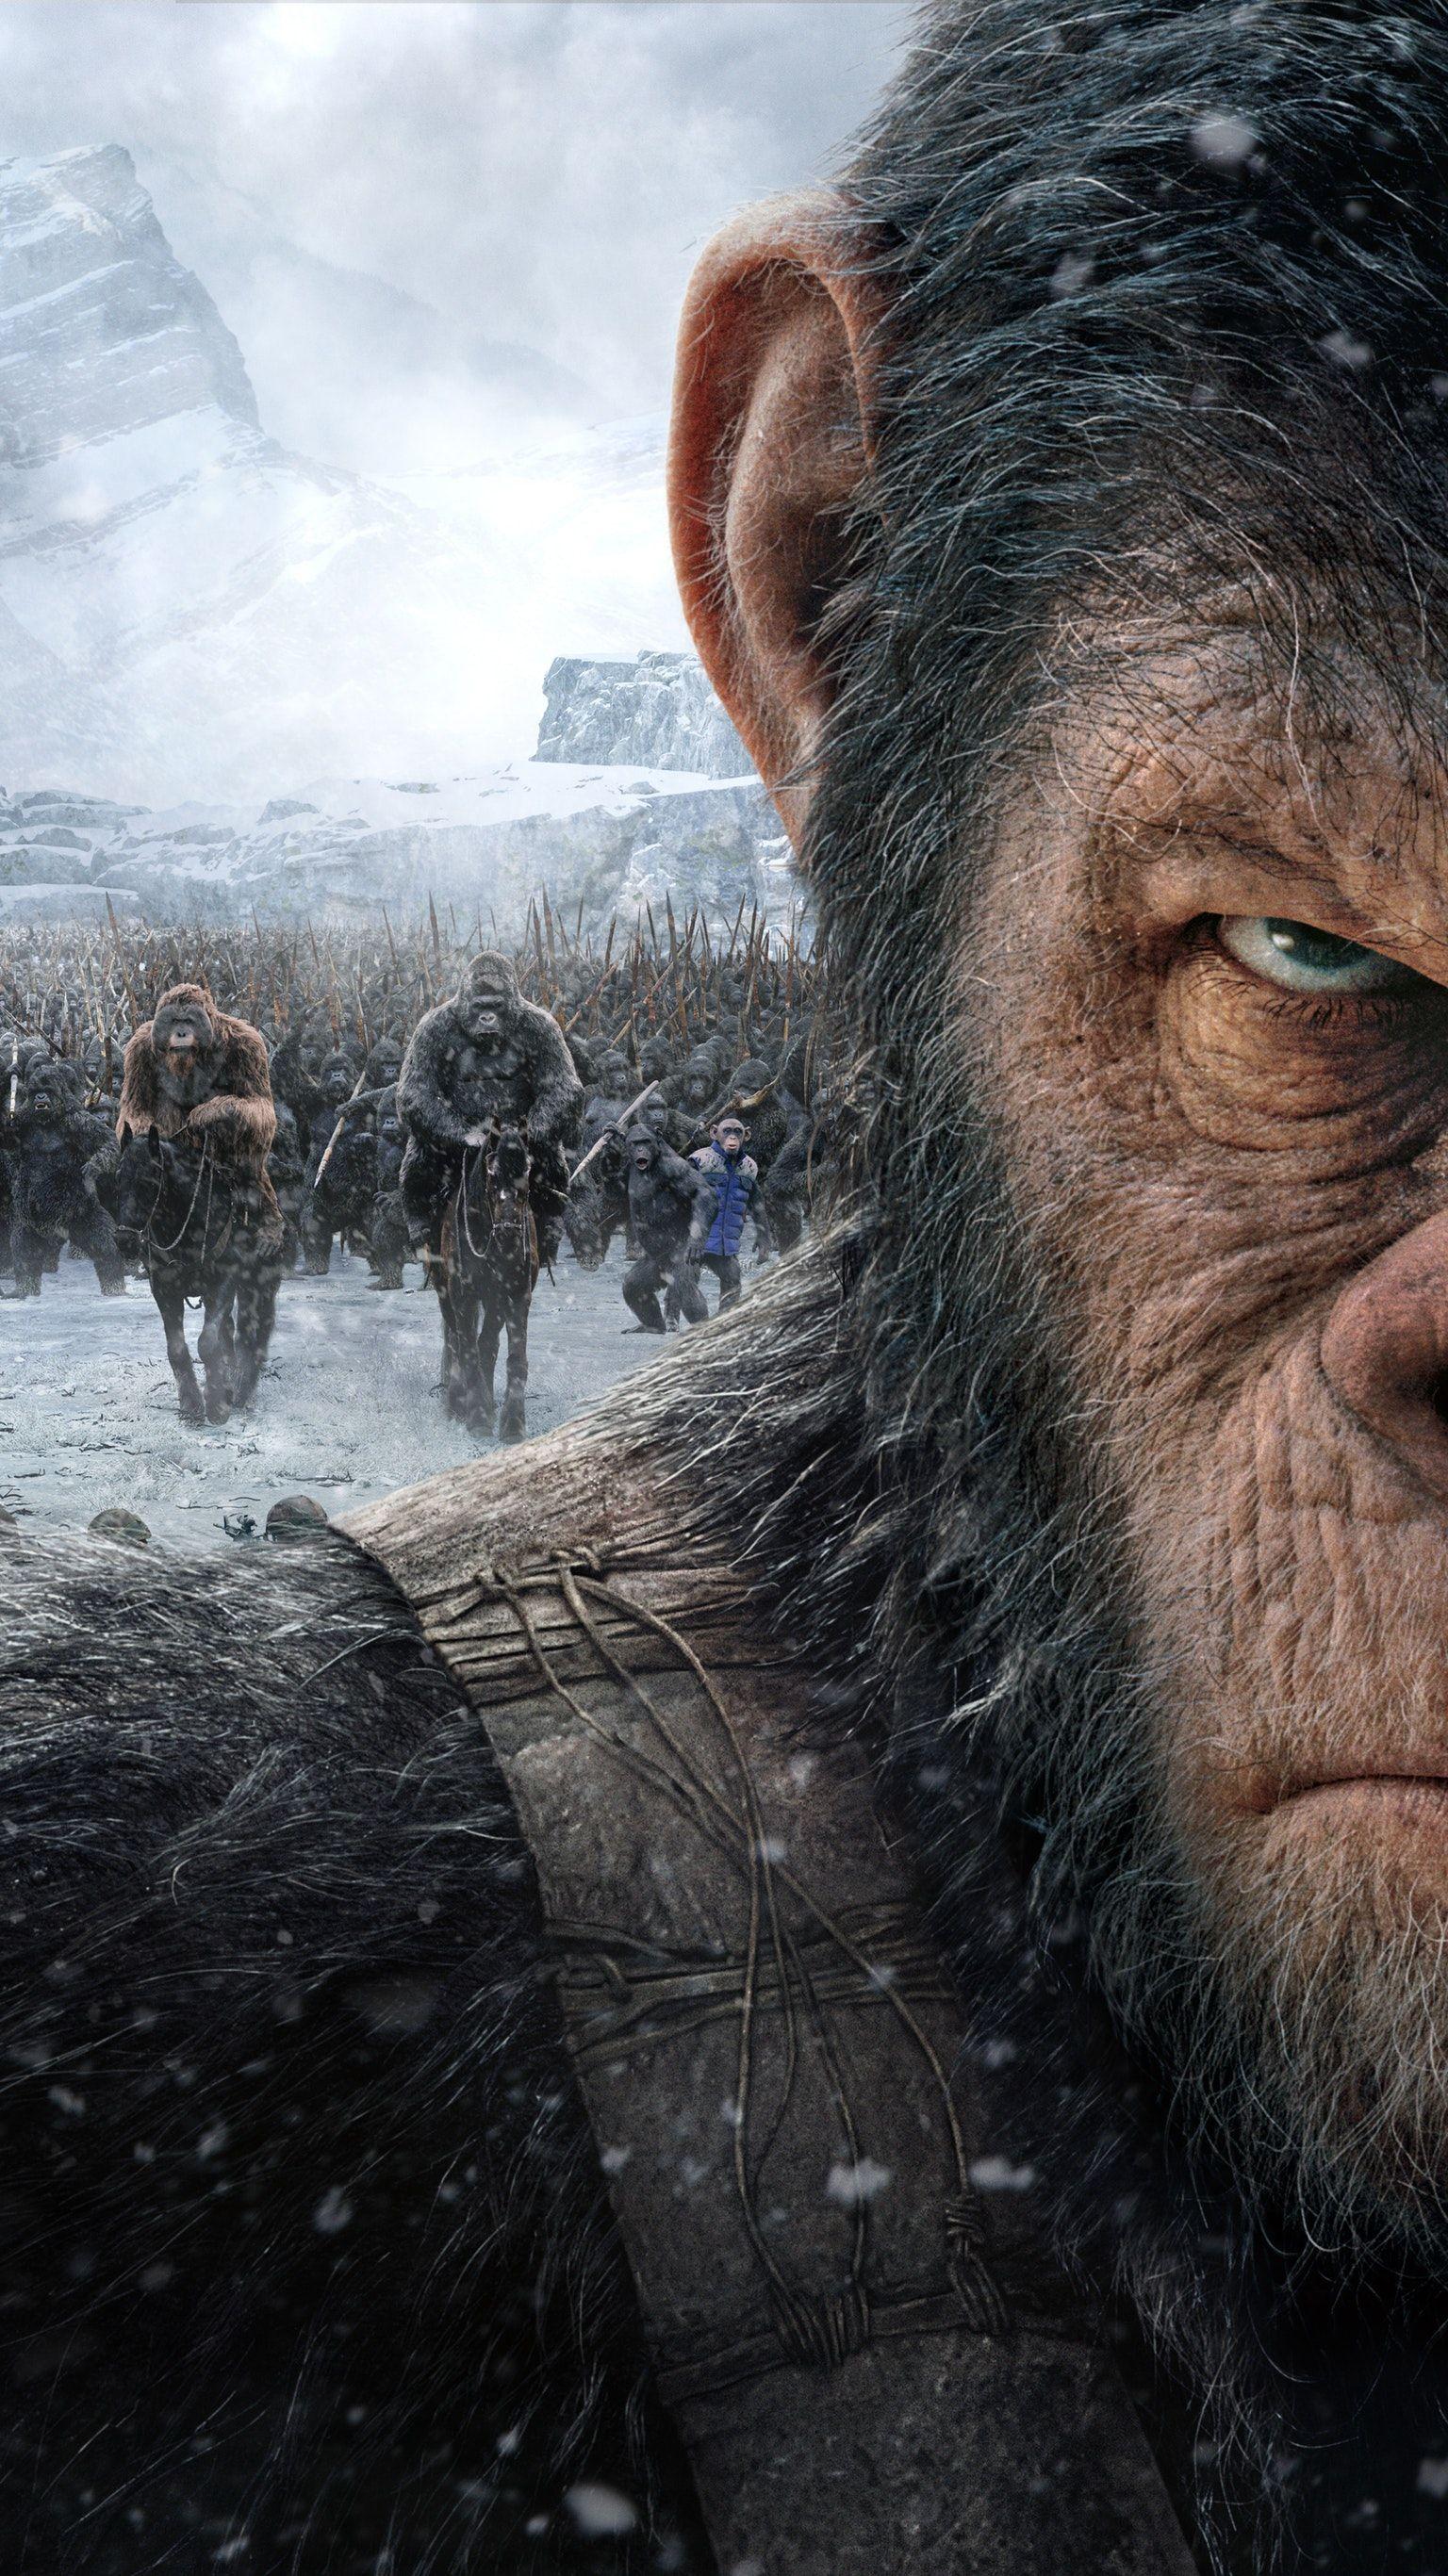 War for the Planet of the Apes (2017) Phone Wallpaper in 2019